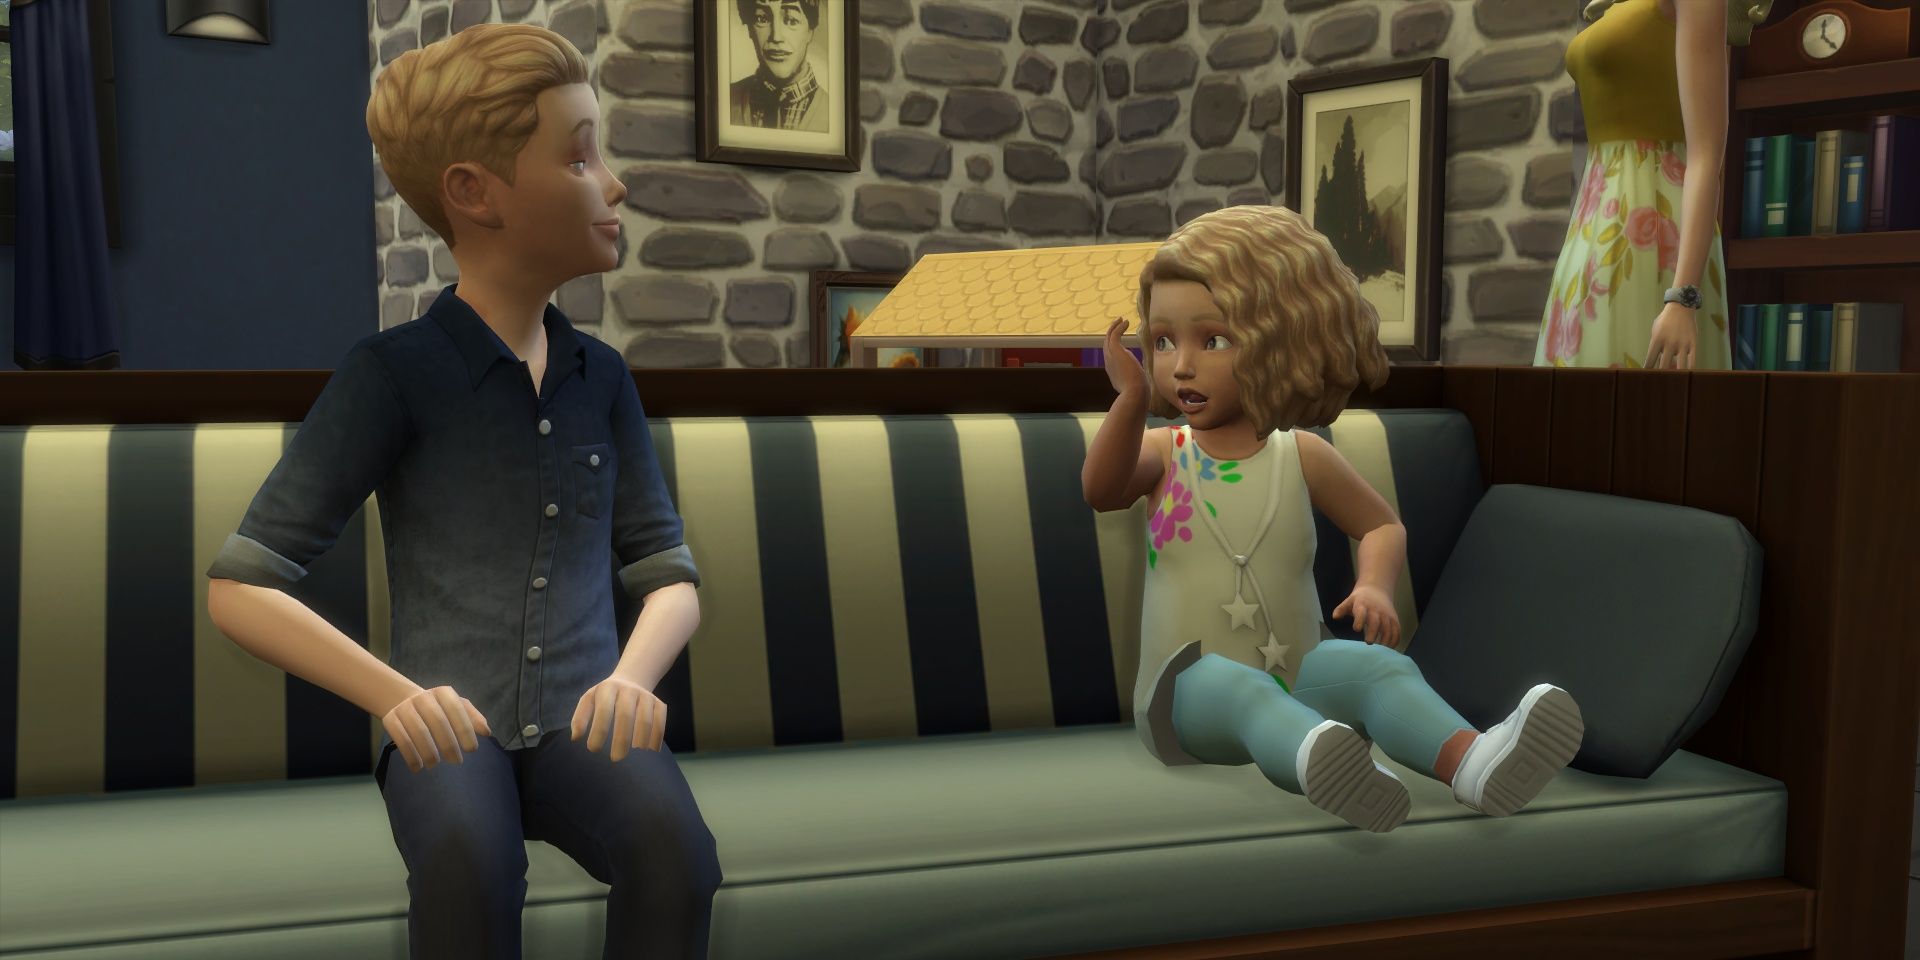 A toddler talking with a child in The Sims 4